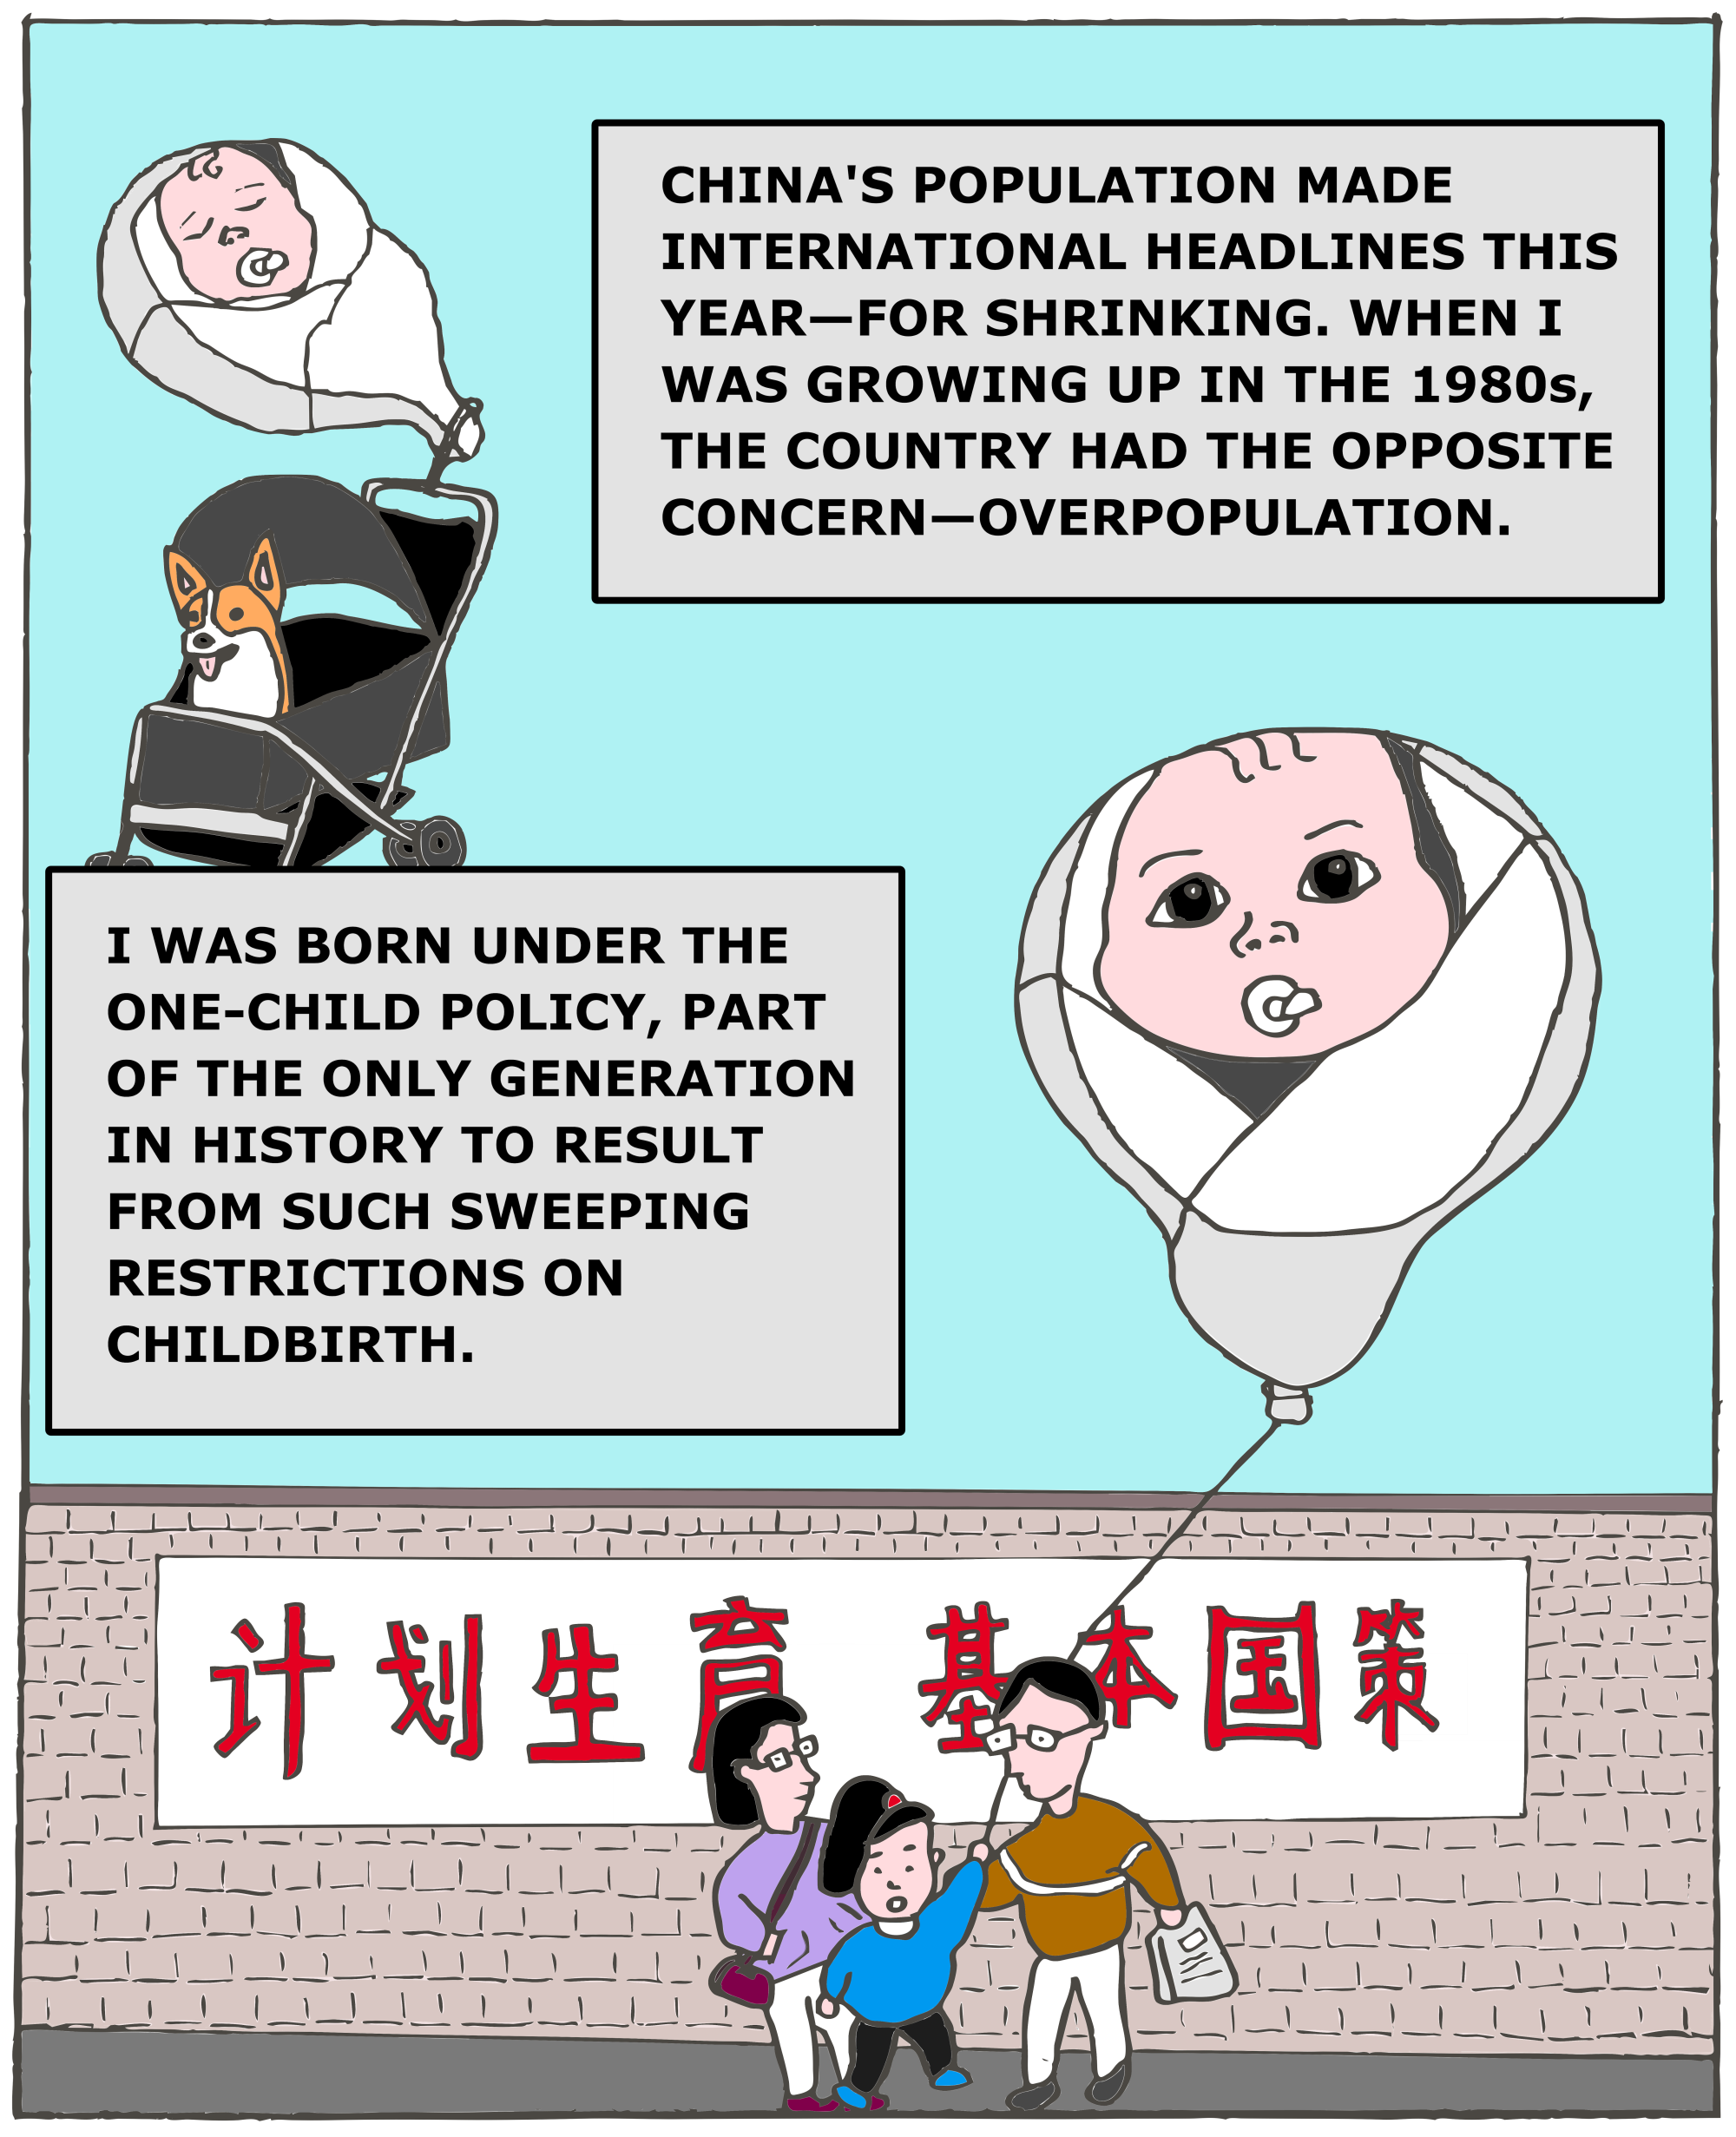 I was born under China's one-child policy, part of the only generation in history to result from such sweeping restrictions.